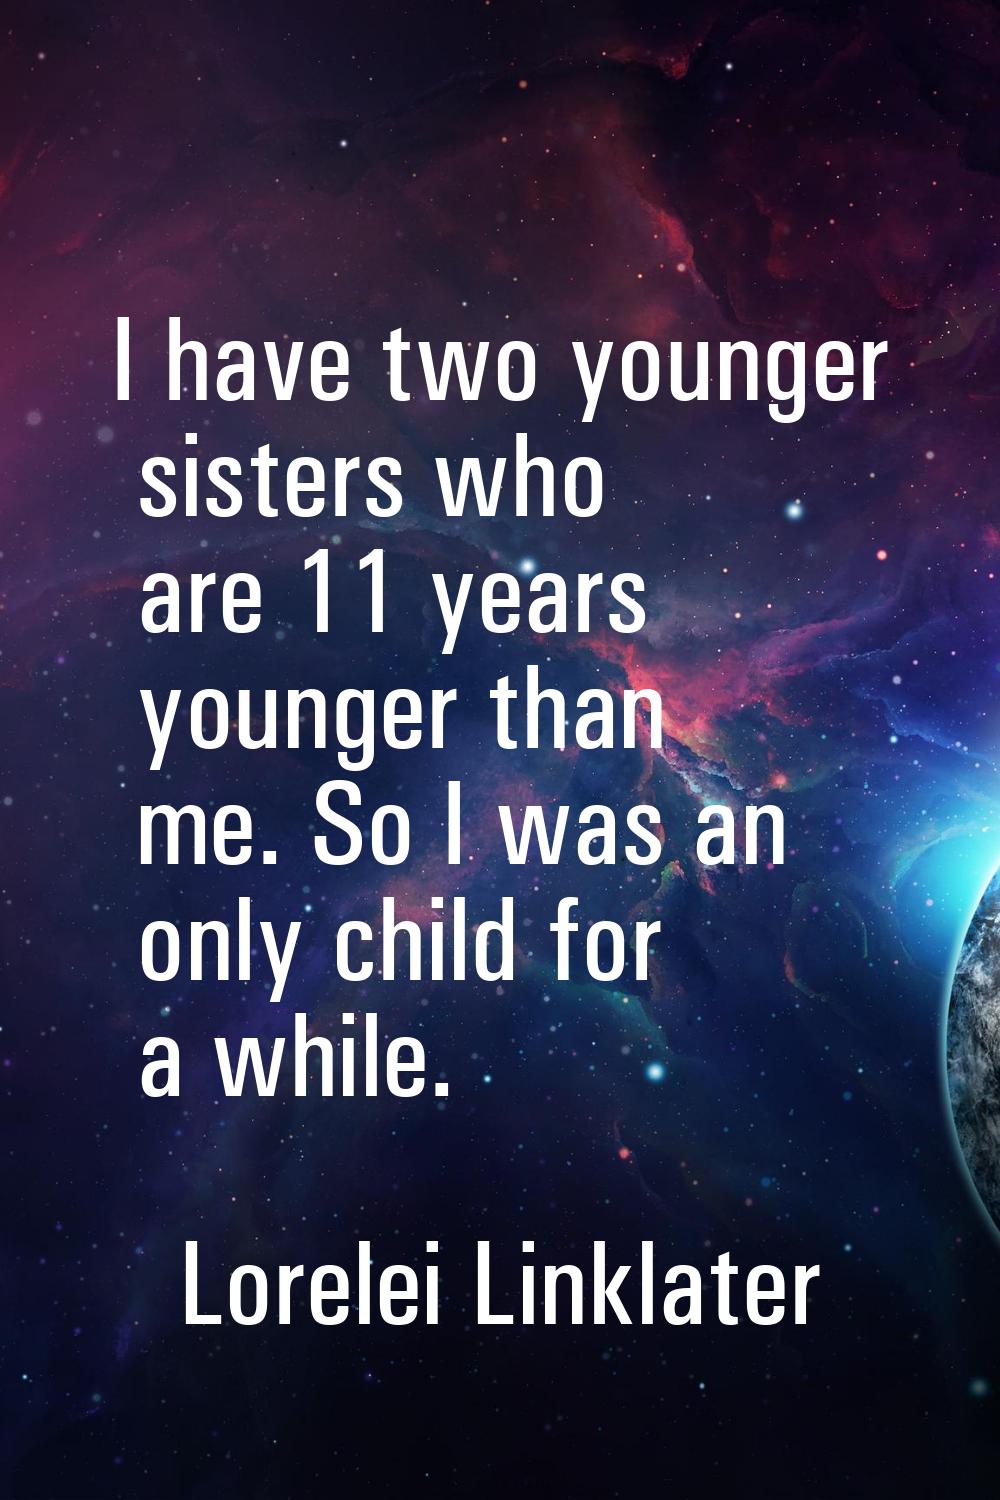 I have two younger sisters who are 11 years younger than me. So I was an only child for a while.